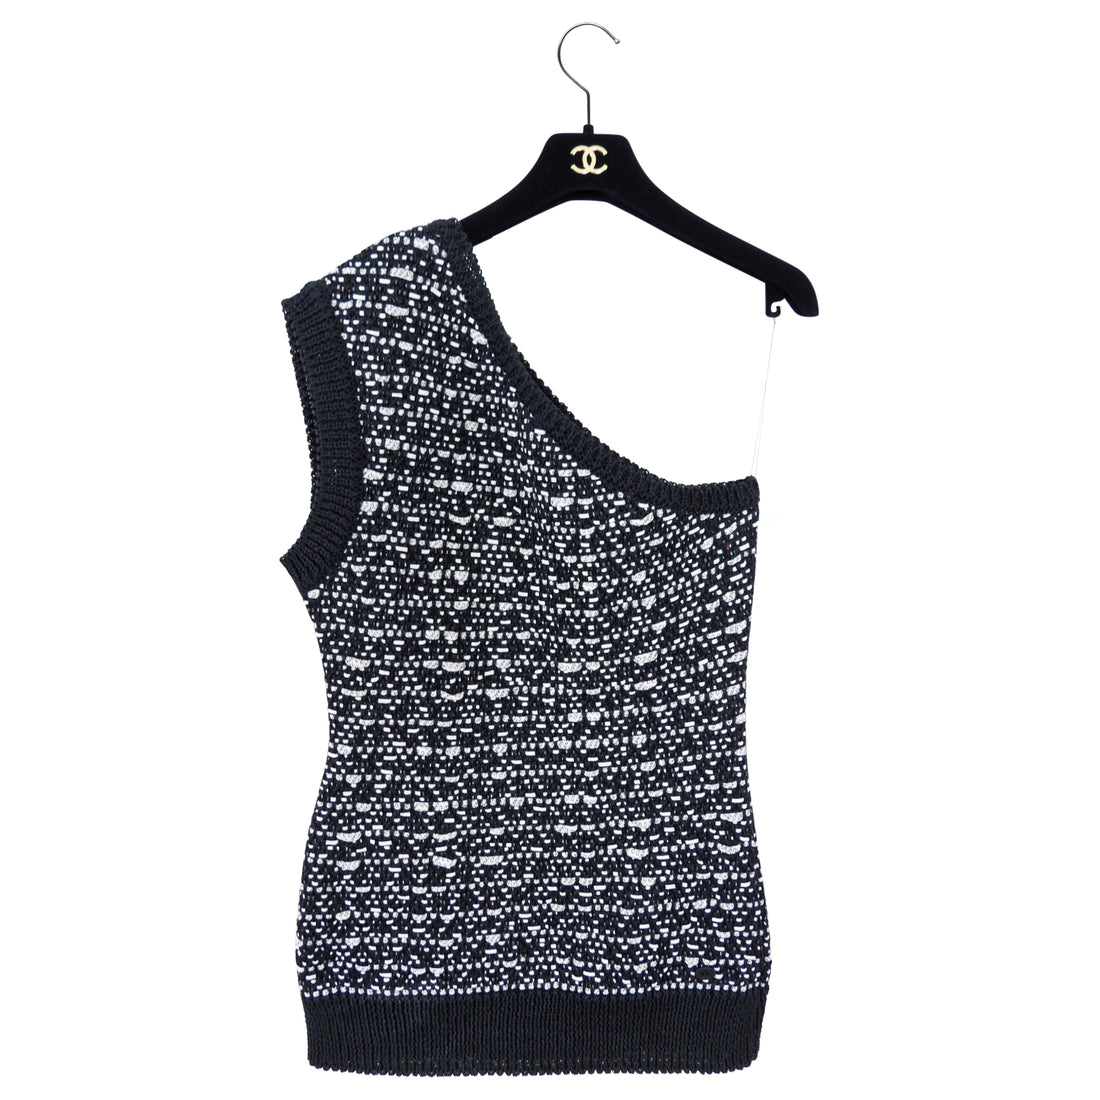 Chanel 14S Black and White Knit One Shoulder Top - FR38 / 6